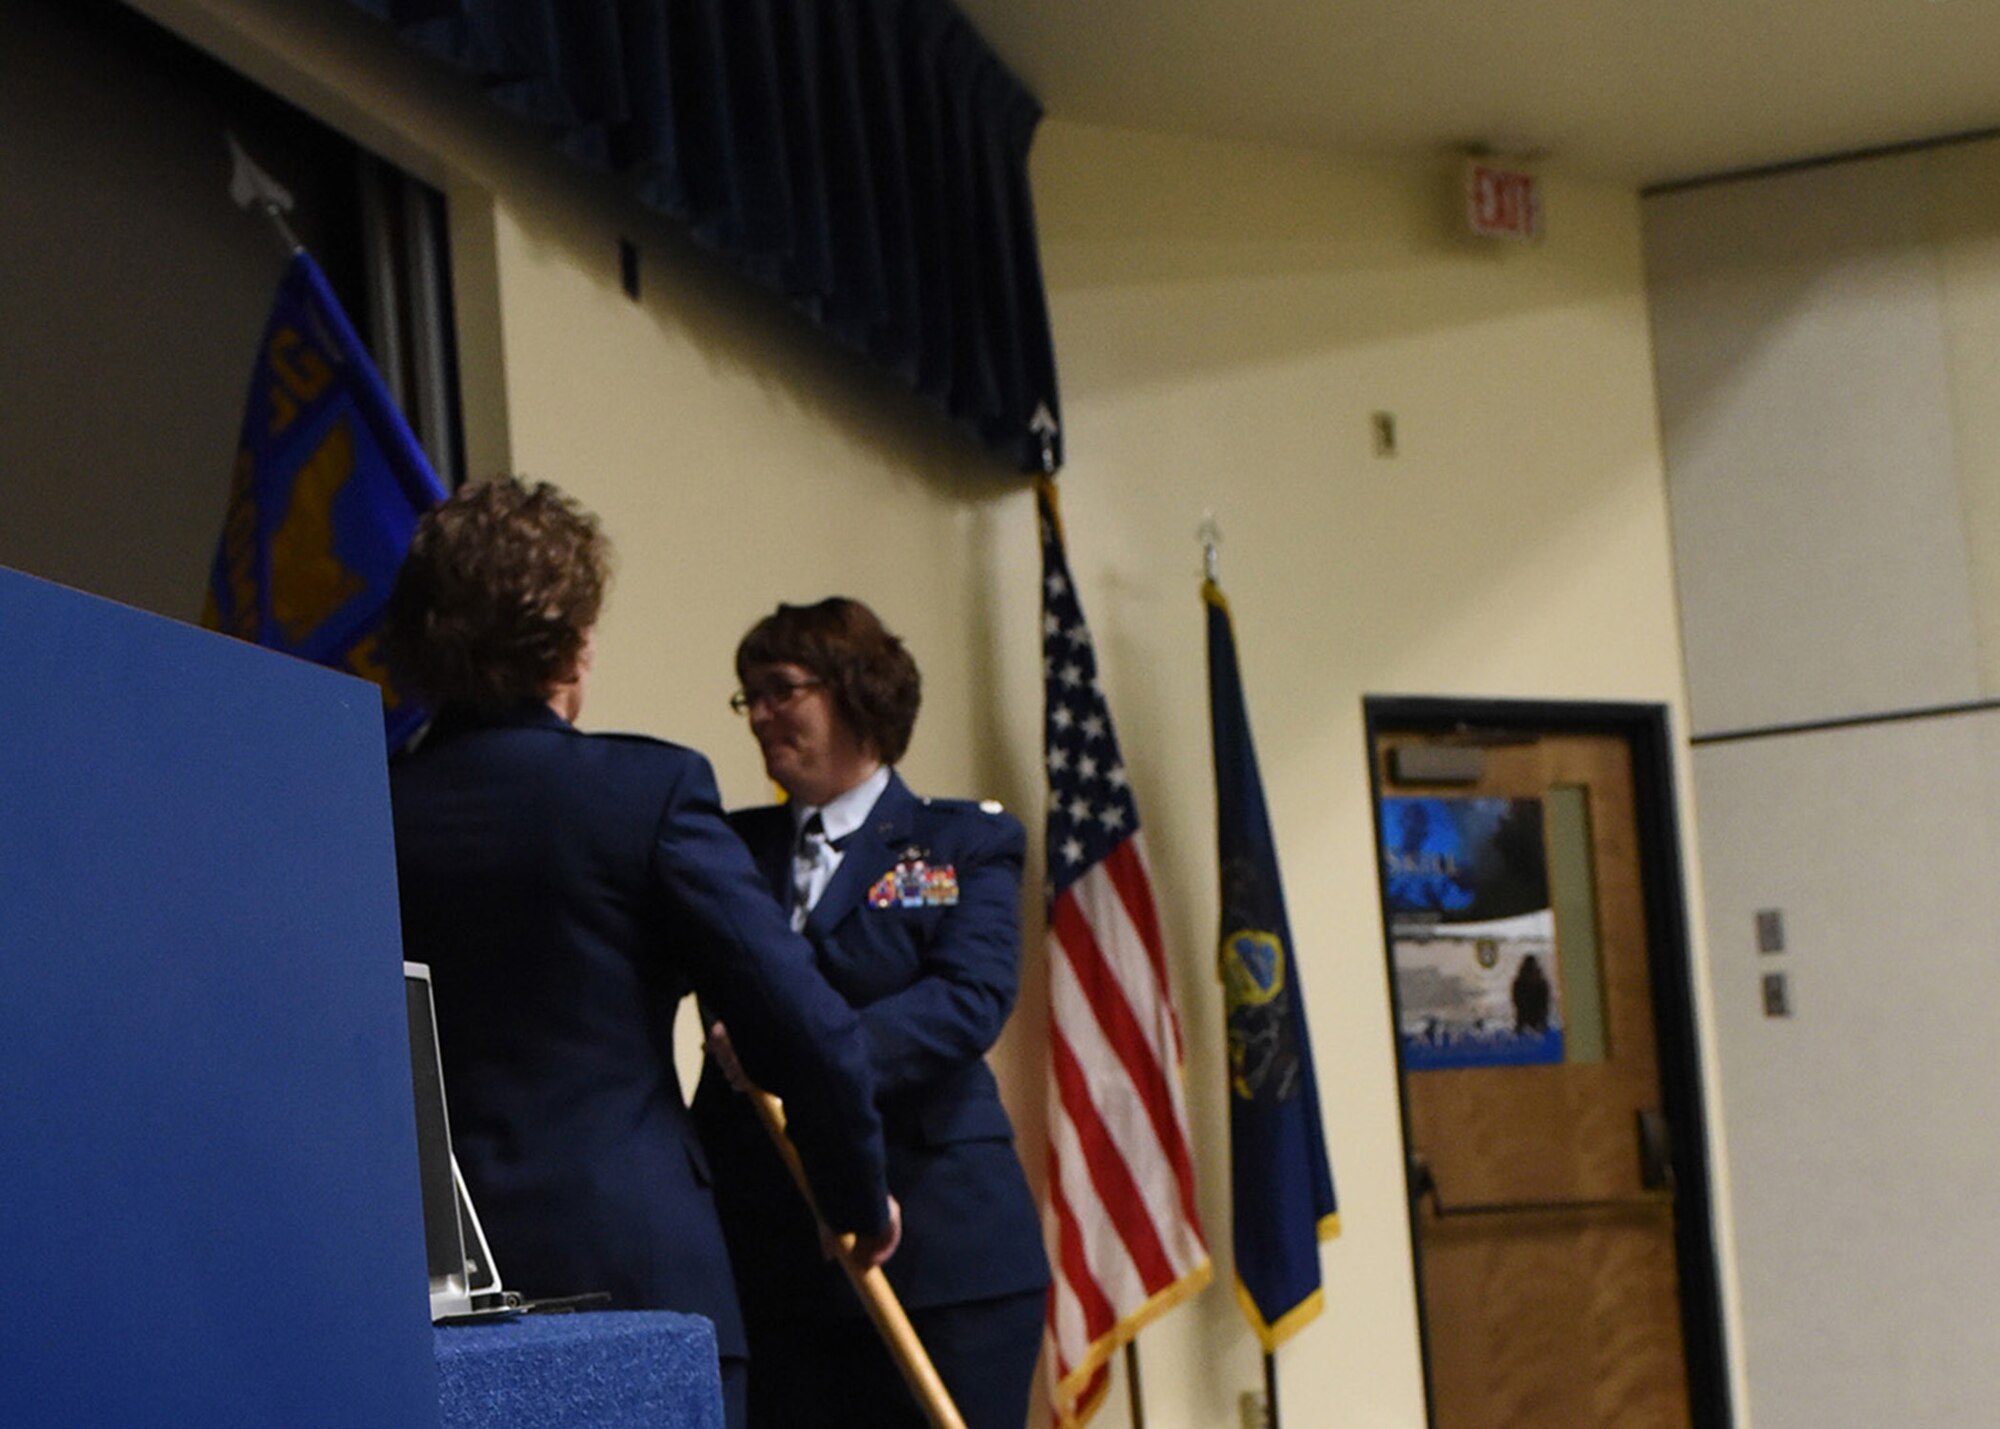 During an assumption of command ceremony Oct. 22 at the 193rd Special Operations Wing, Middletown, Pennsylvania, Lt. Col. Susan Garrett (left), 193rd Special Operations Mission Support Group commander, presented the guidon to Lt. Col. Angela Stateler, appointing her as the new 193rd Special Operations Force Support Squadron commander. The ceremony began with preliminary honors and ended with the symbolic passing of the guidon. (U.S. Air National Guard photo by Airman 1st Class Julia Sorber/Released)